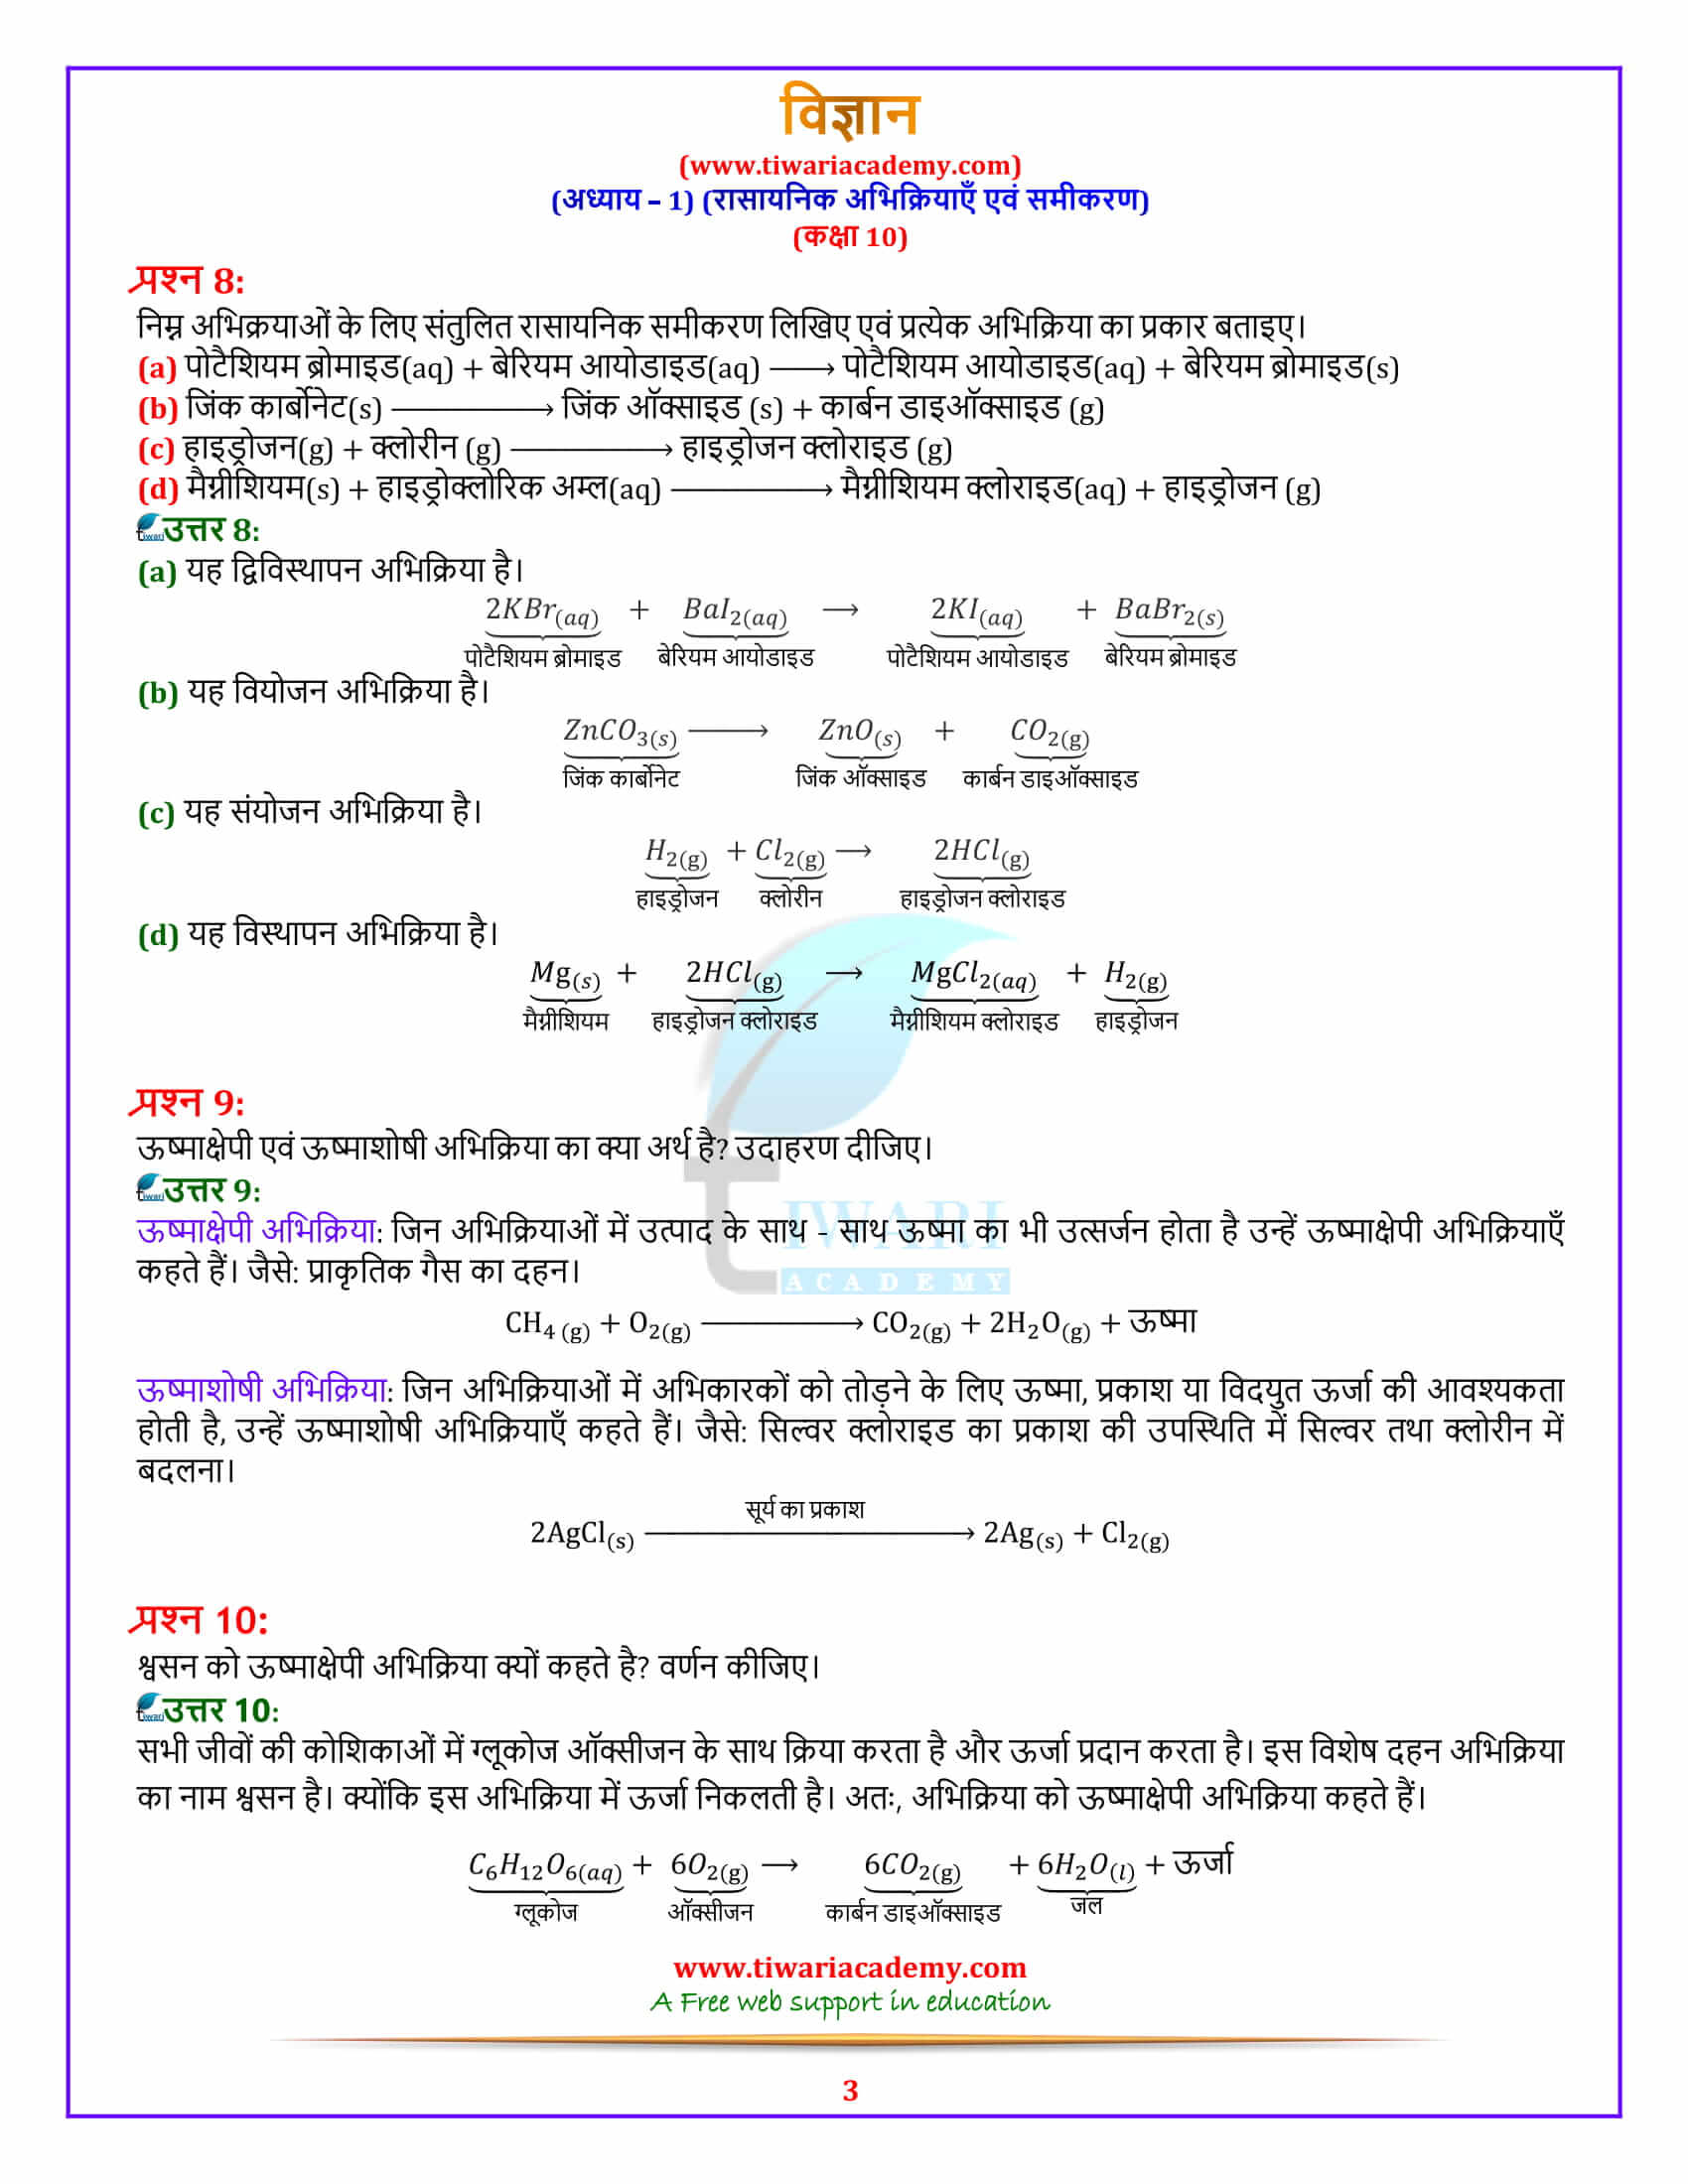 10 Science Chapter 1 Solutions in pdf form